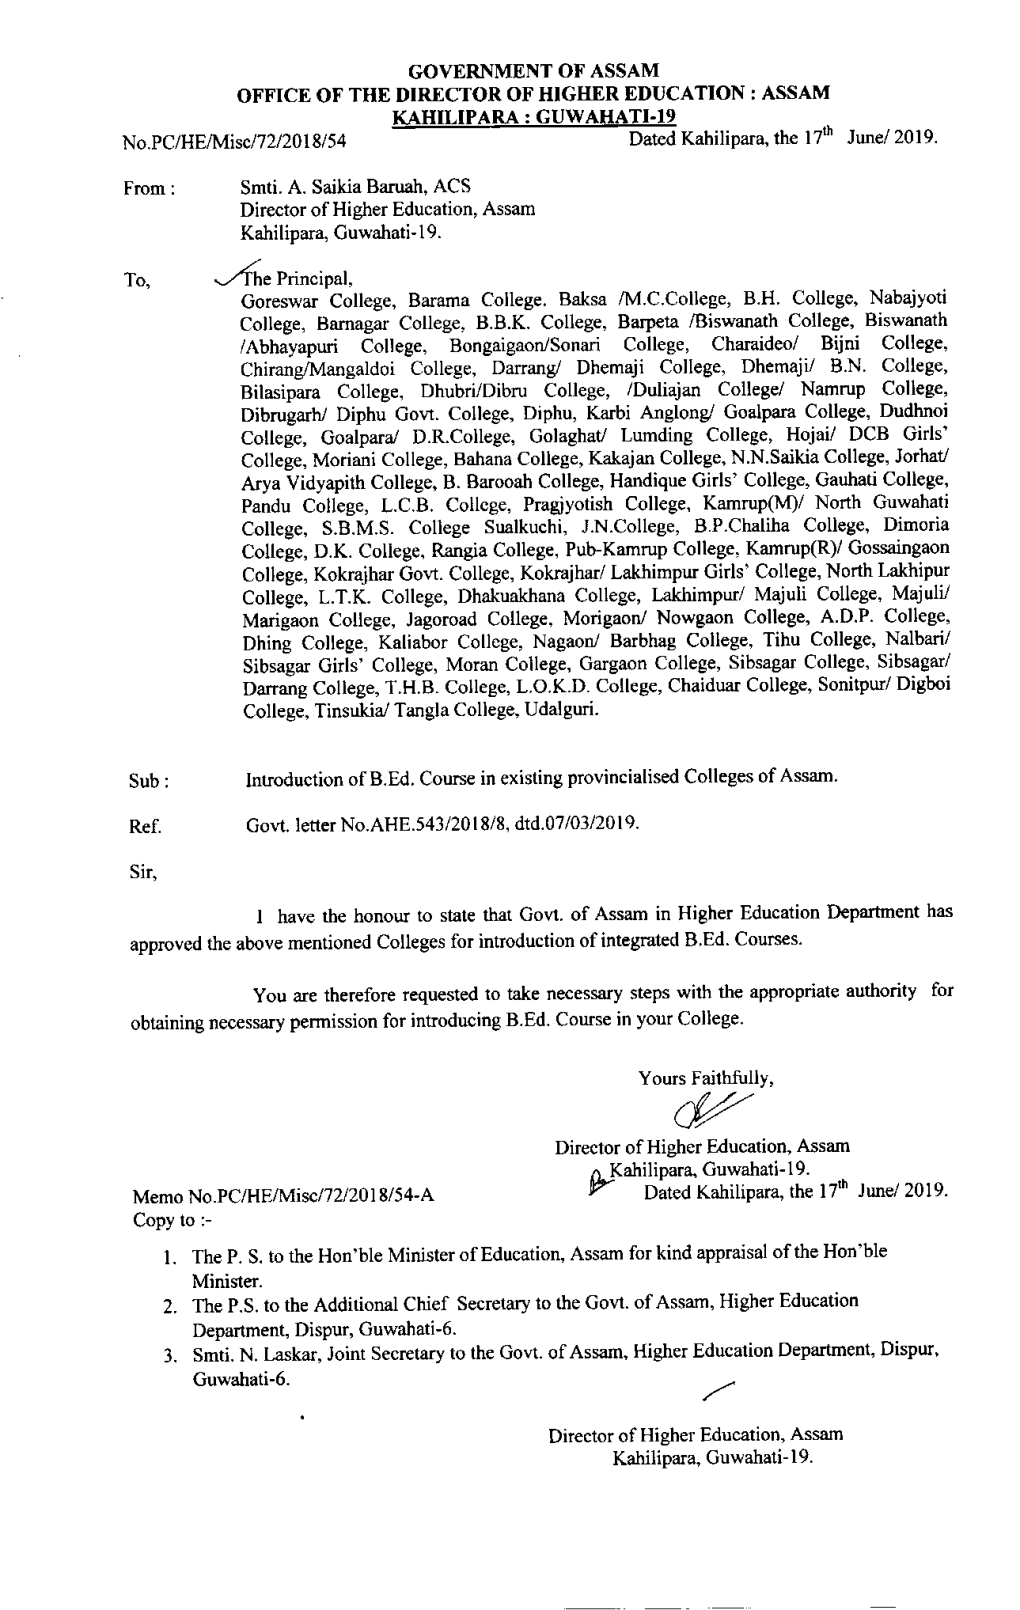 B.Ed Course in Existing Provincialised Colleges of Assam